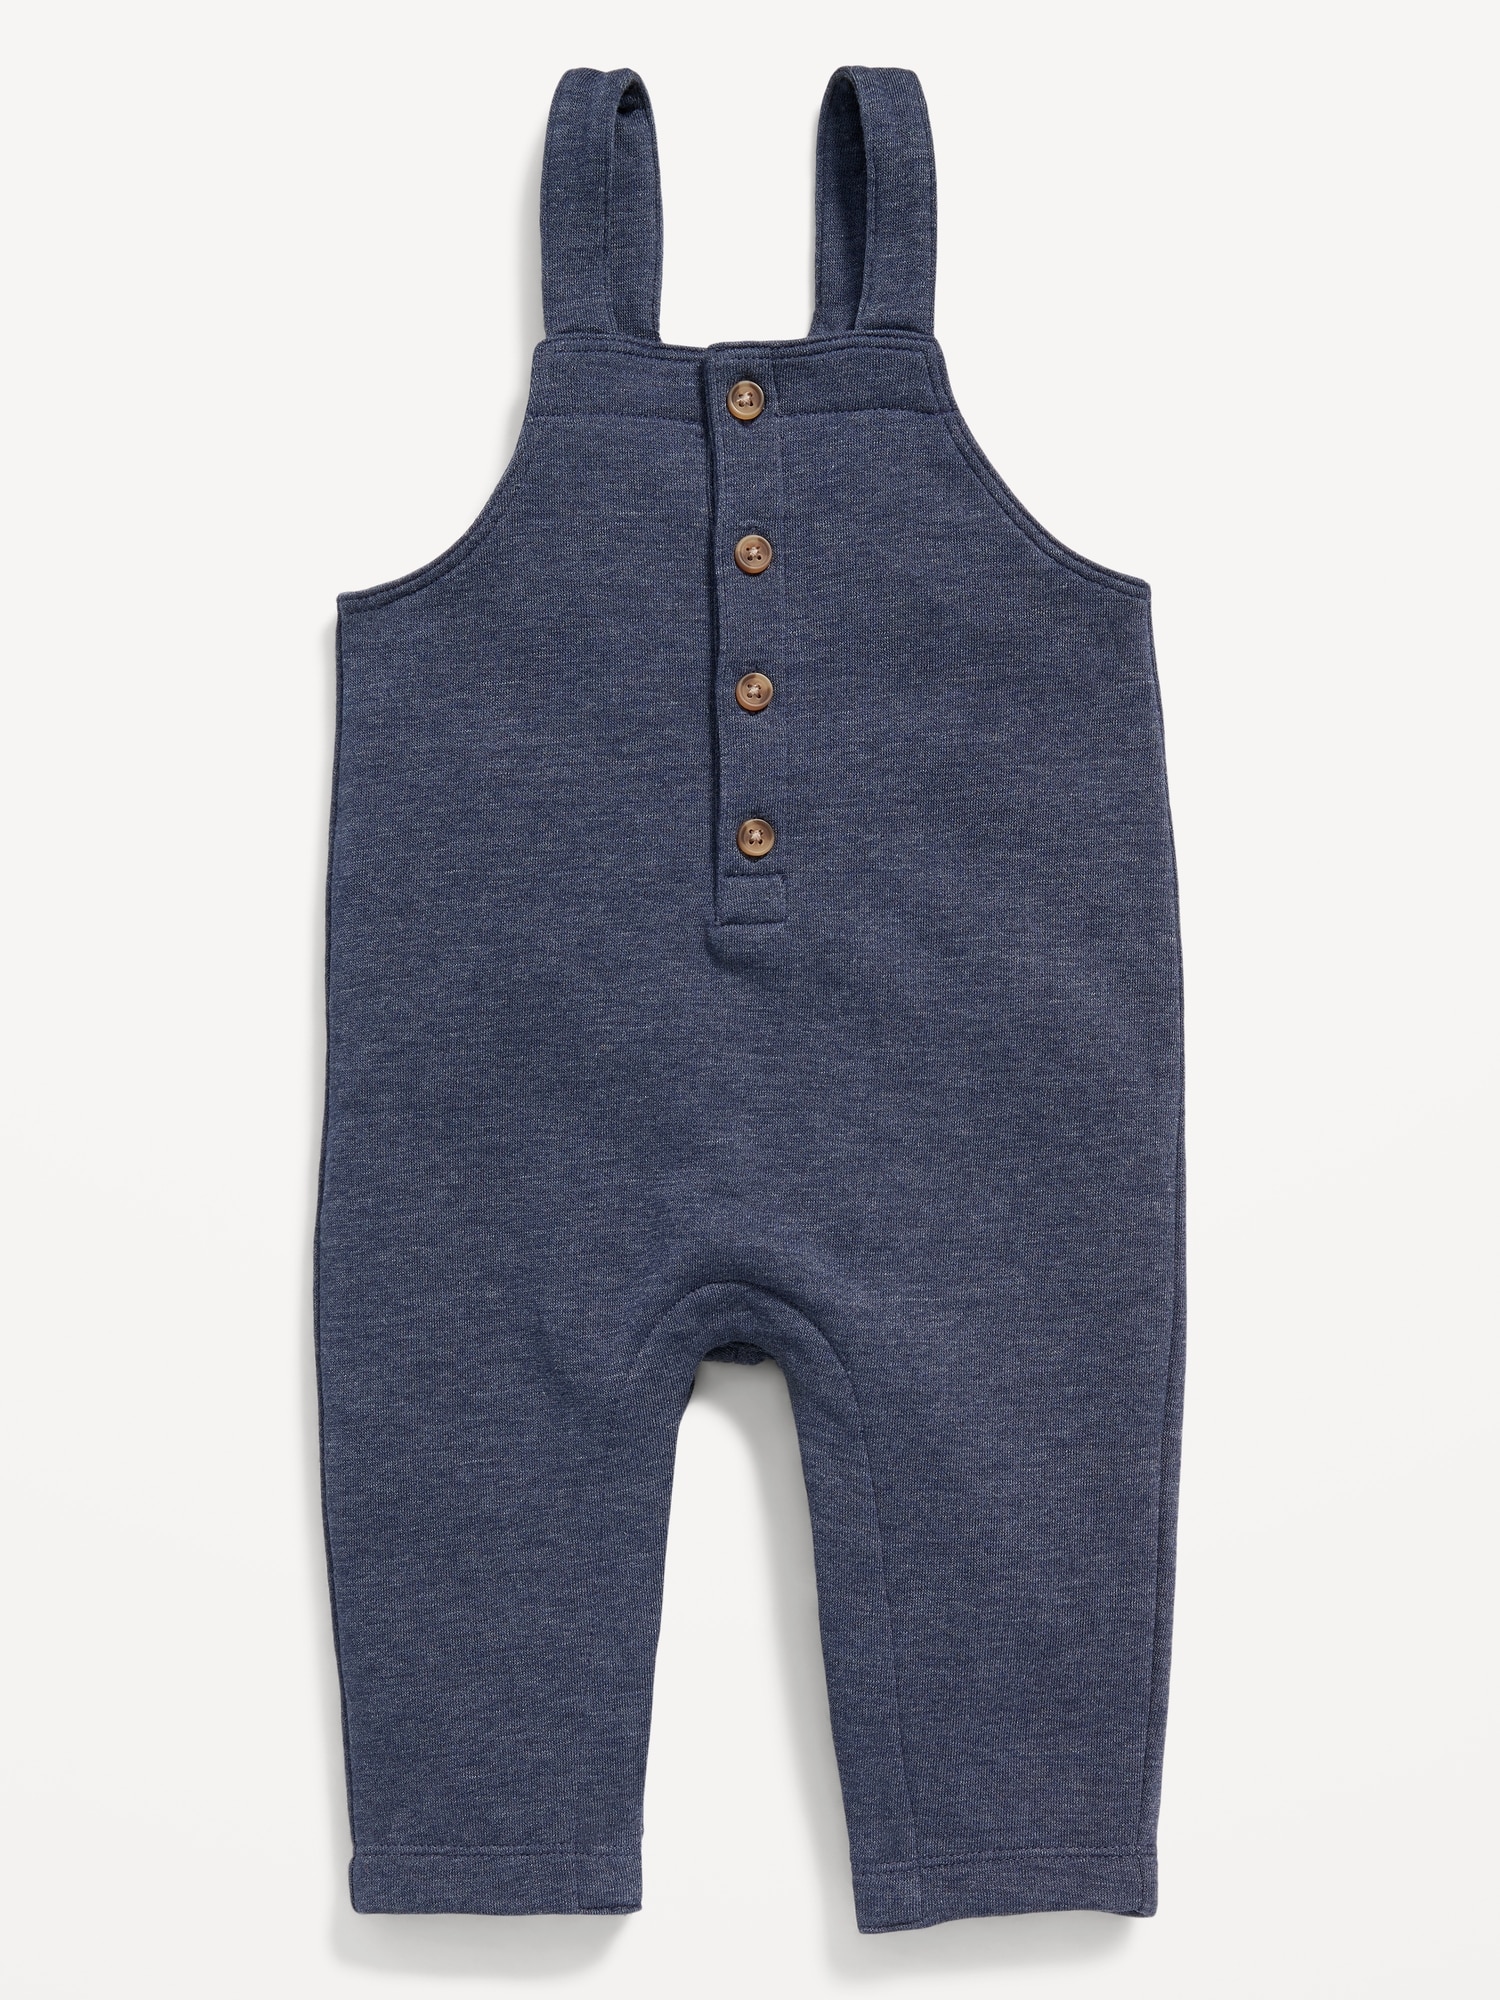 Unisex Sleeveless Button-Front Overalls for Baby